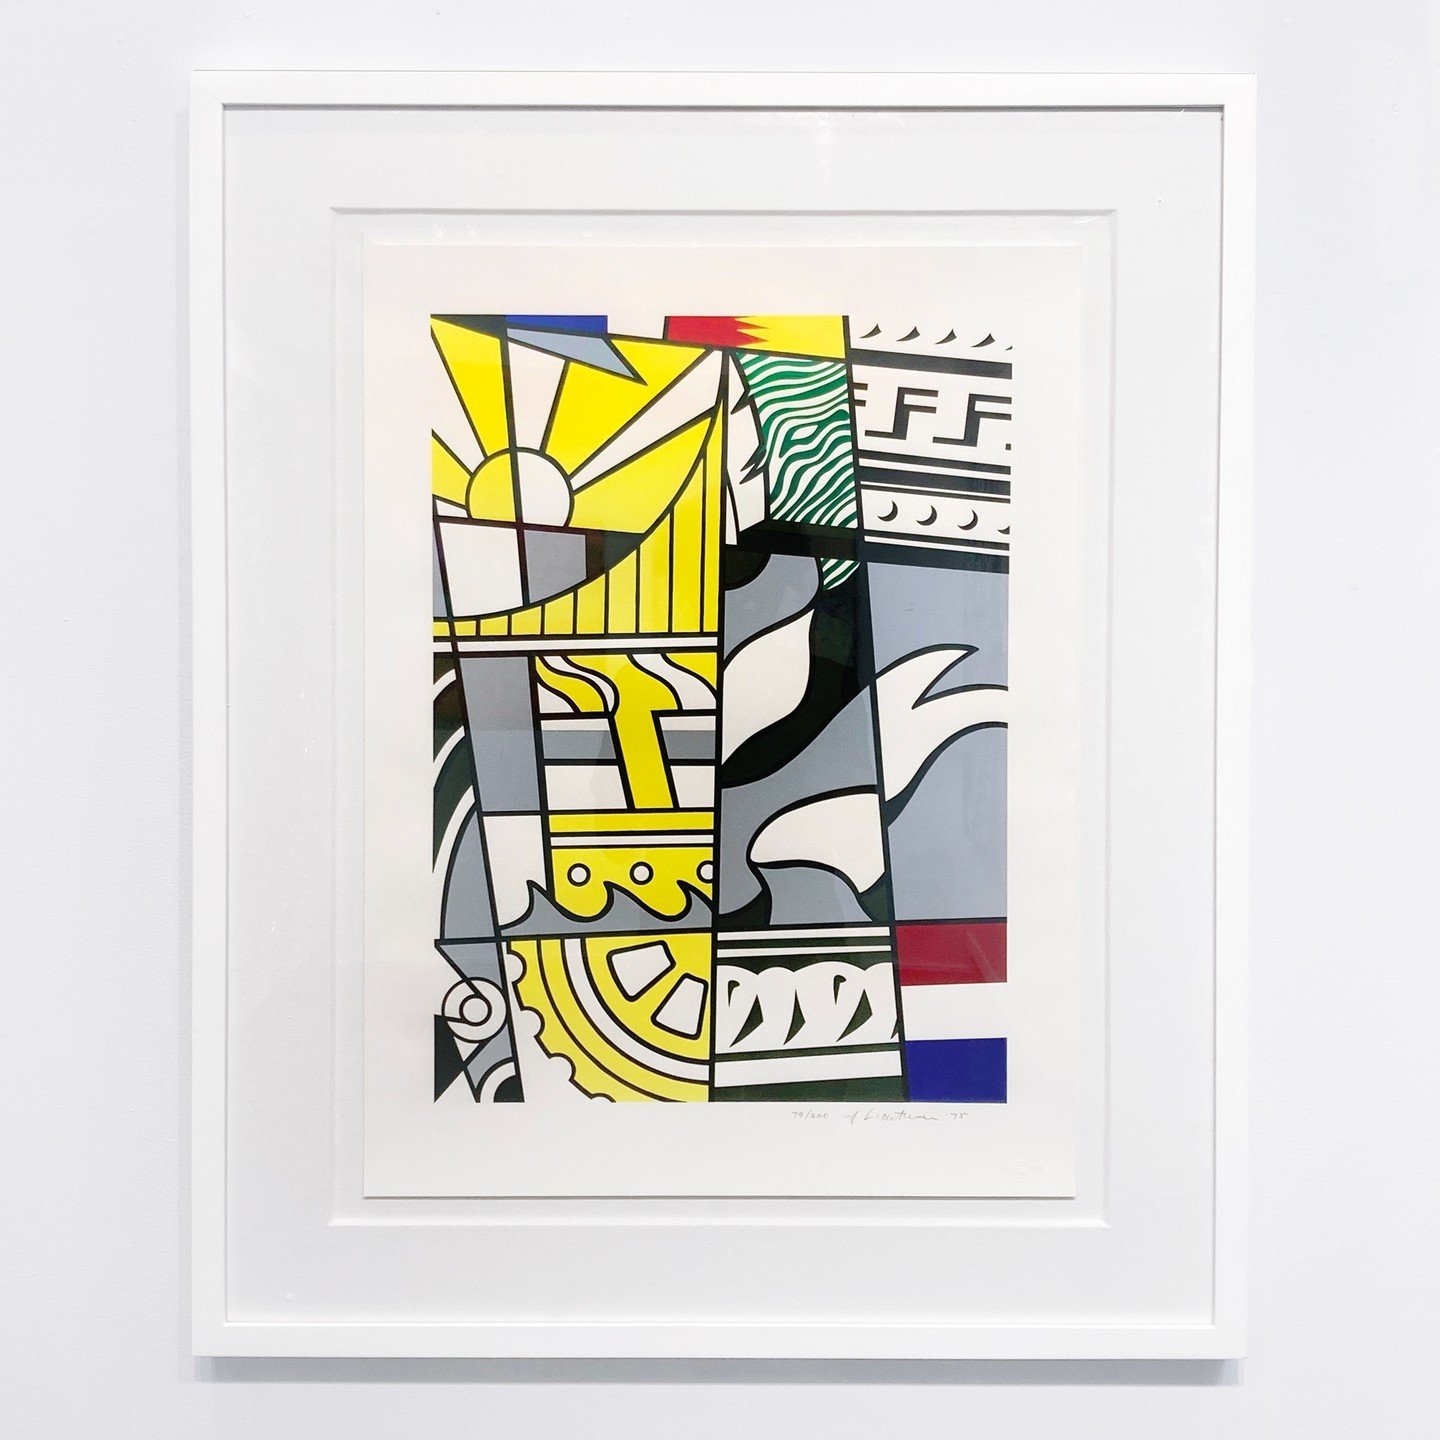 We have a new #RoyLichtenstein in #SoHo 💥 signed &lsquo;Bicentennial Print&rsquo; is on view now!

Link in bio and DM for inquiries.
.
.
.
#dtrmodern #artgallery #popart #popartist #poparticon #lichtenstein #nyc #artoftheday #artdaily #artcollector 